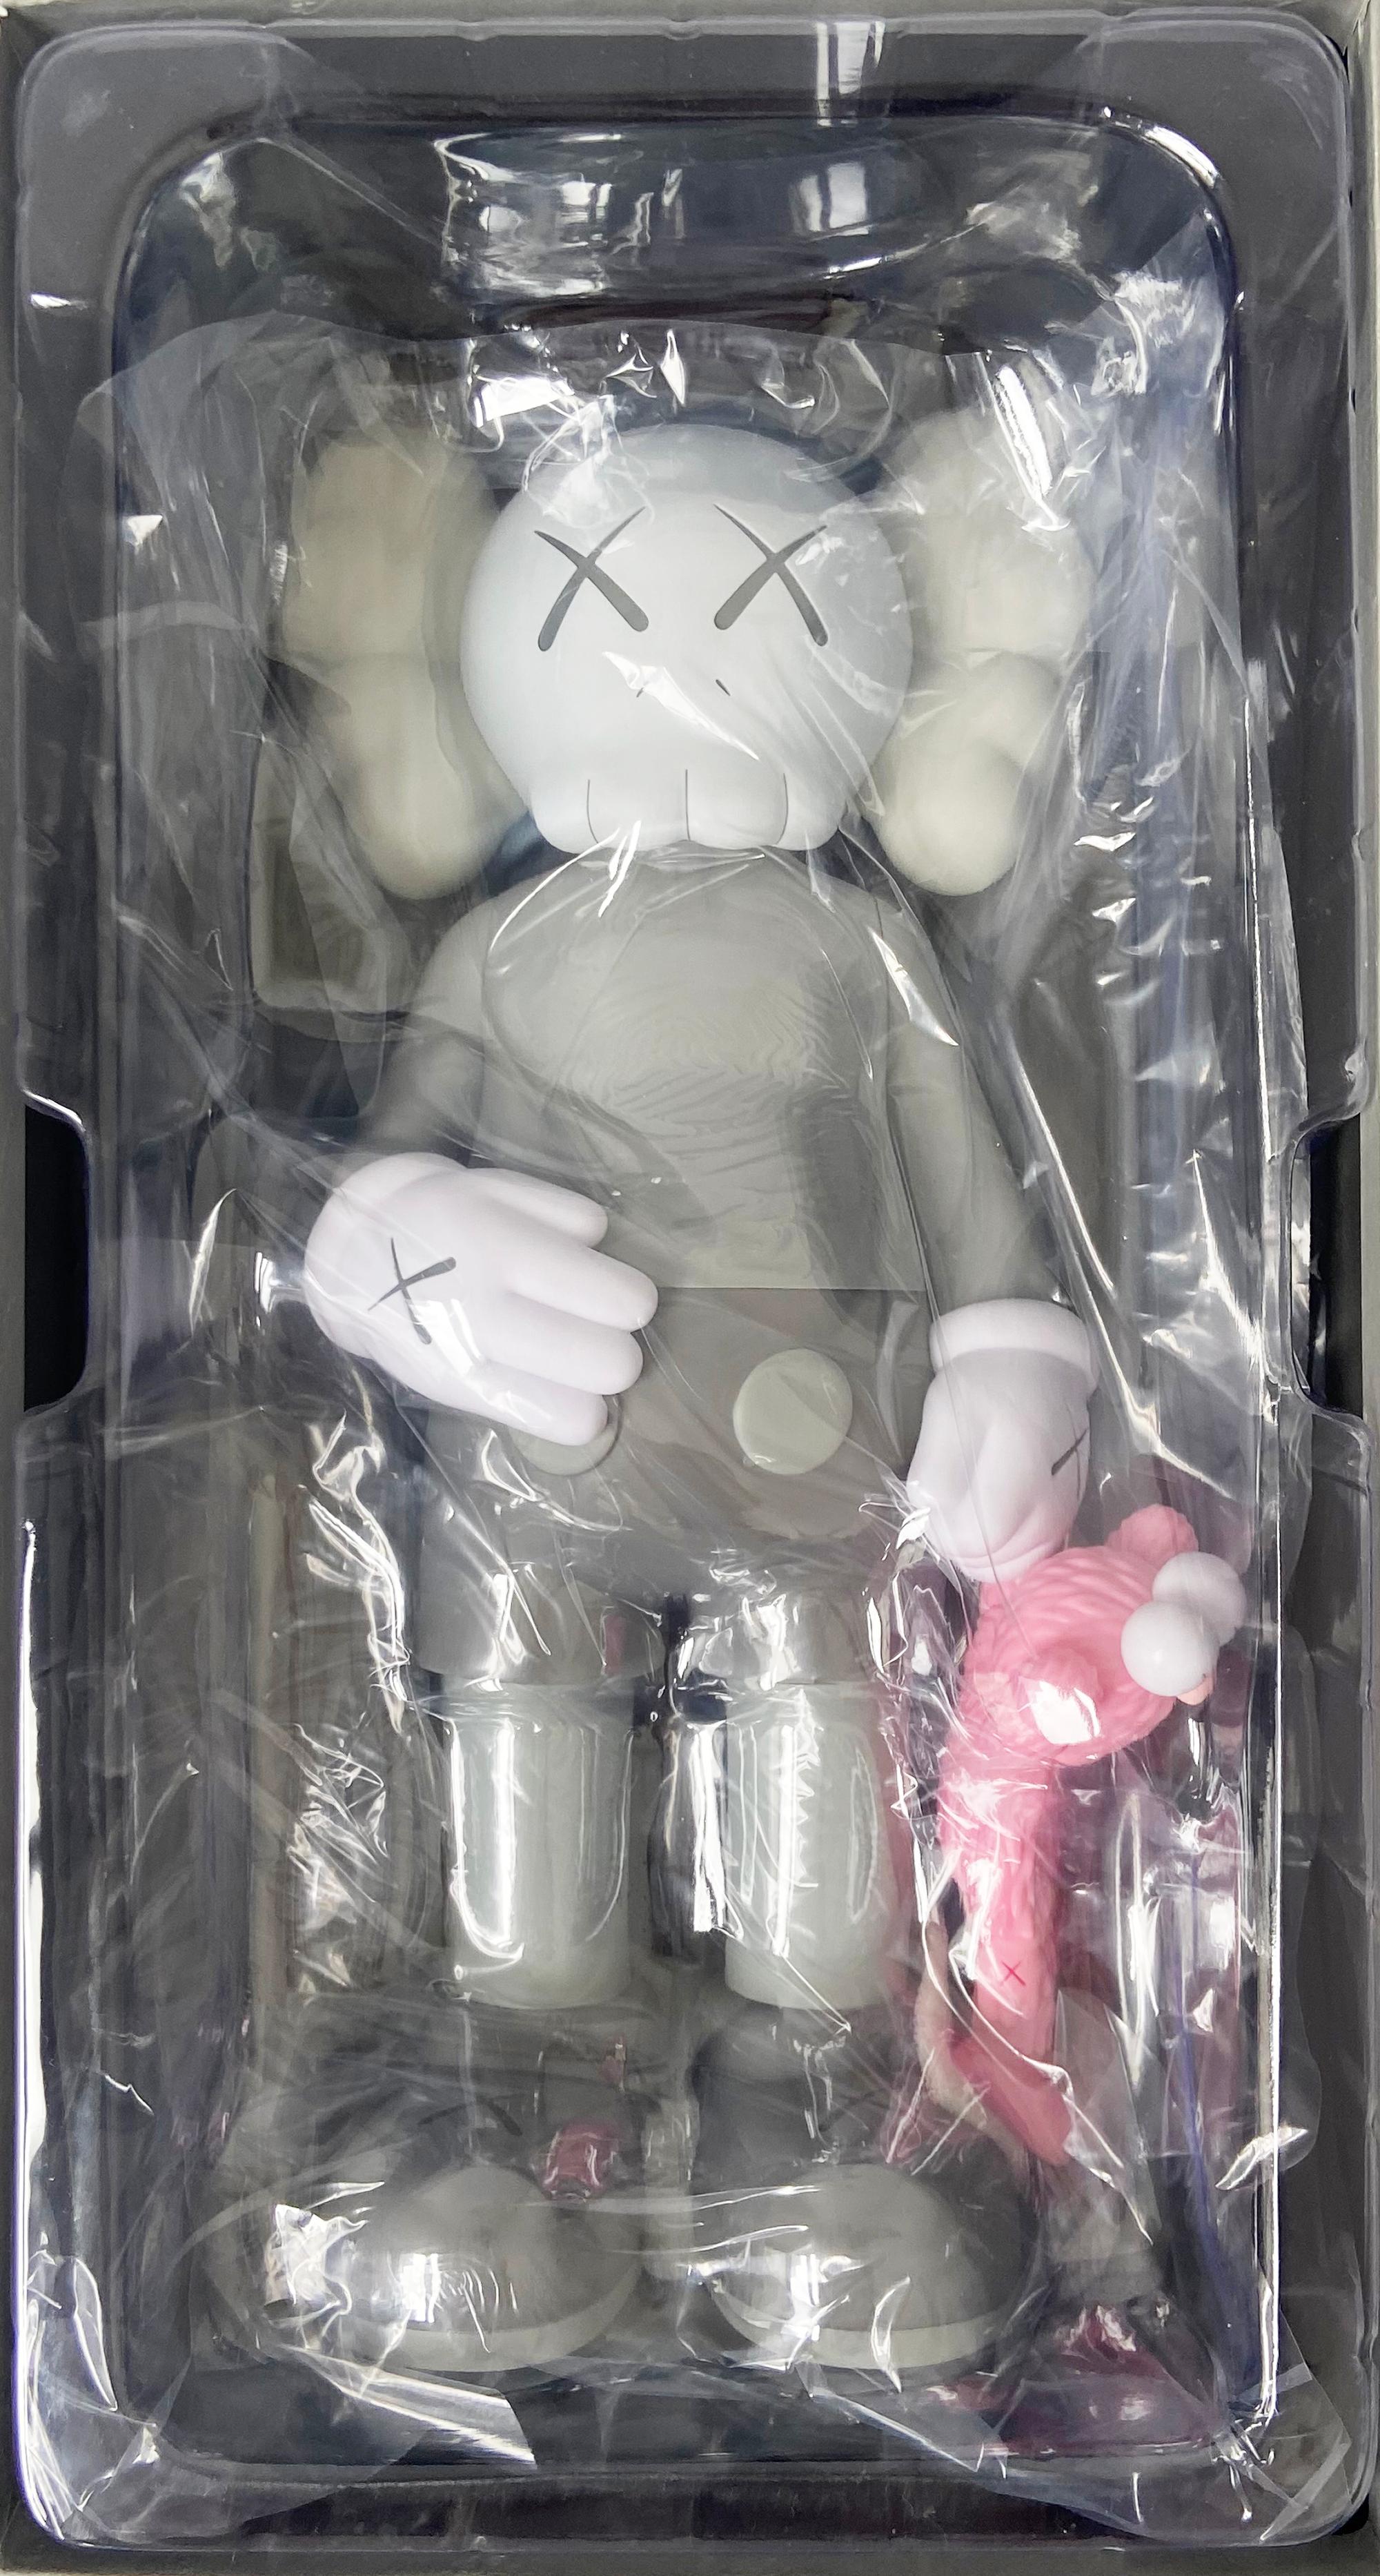 KAWS SHARE (Grey), new & unopened in its original packaging. 
KAWS SHARE first appeared in 'BLACKOUT' – the first London solo exhibition by KAWS (Skarstedt London 2019). In SHARE, KAWS uses two of his characters to convey opposing human attitudes-